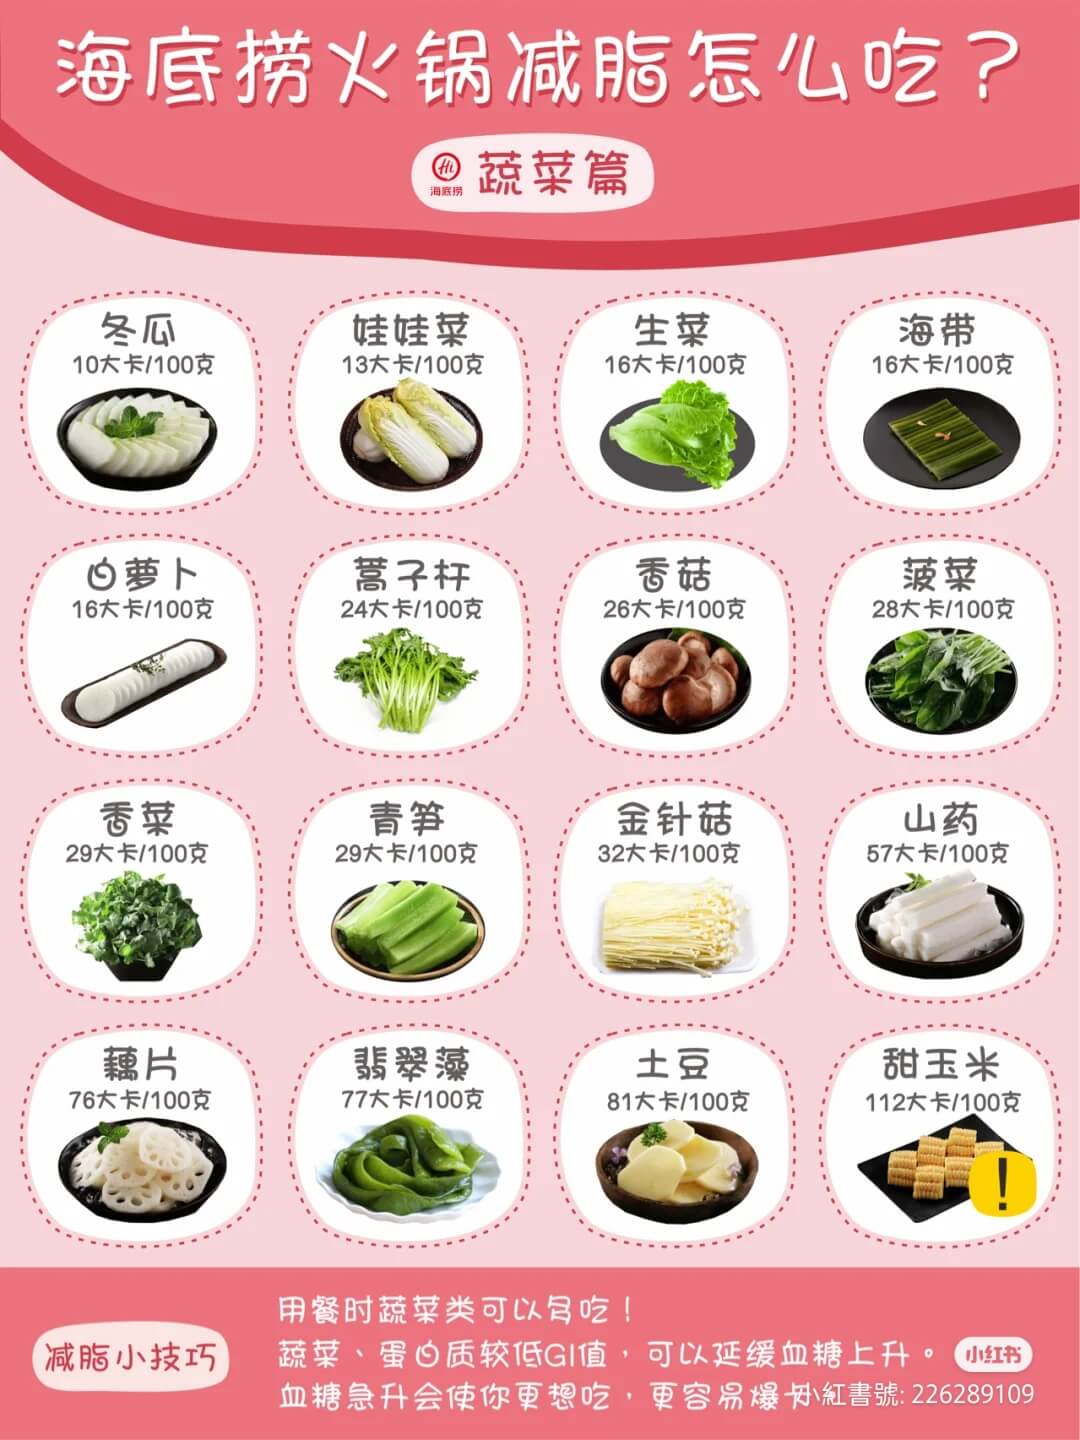 how-to-eat-haidilao-hotpot-without-guilt-vege